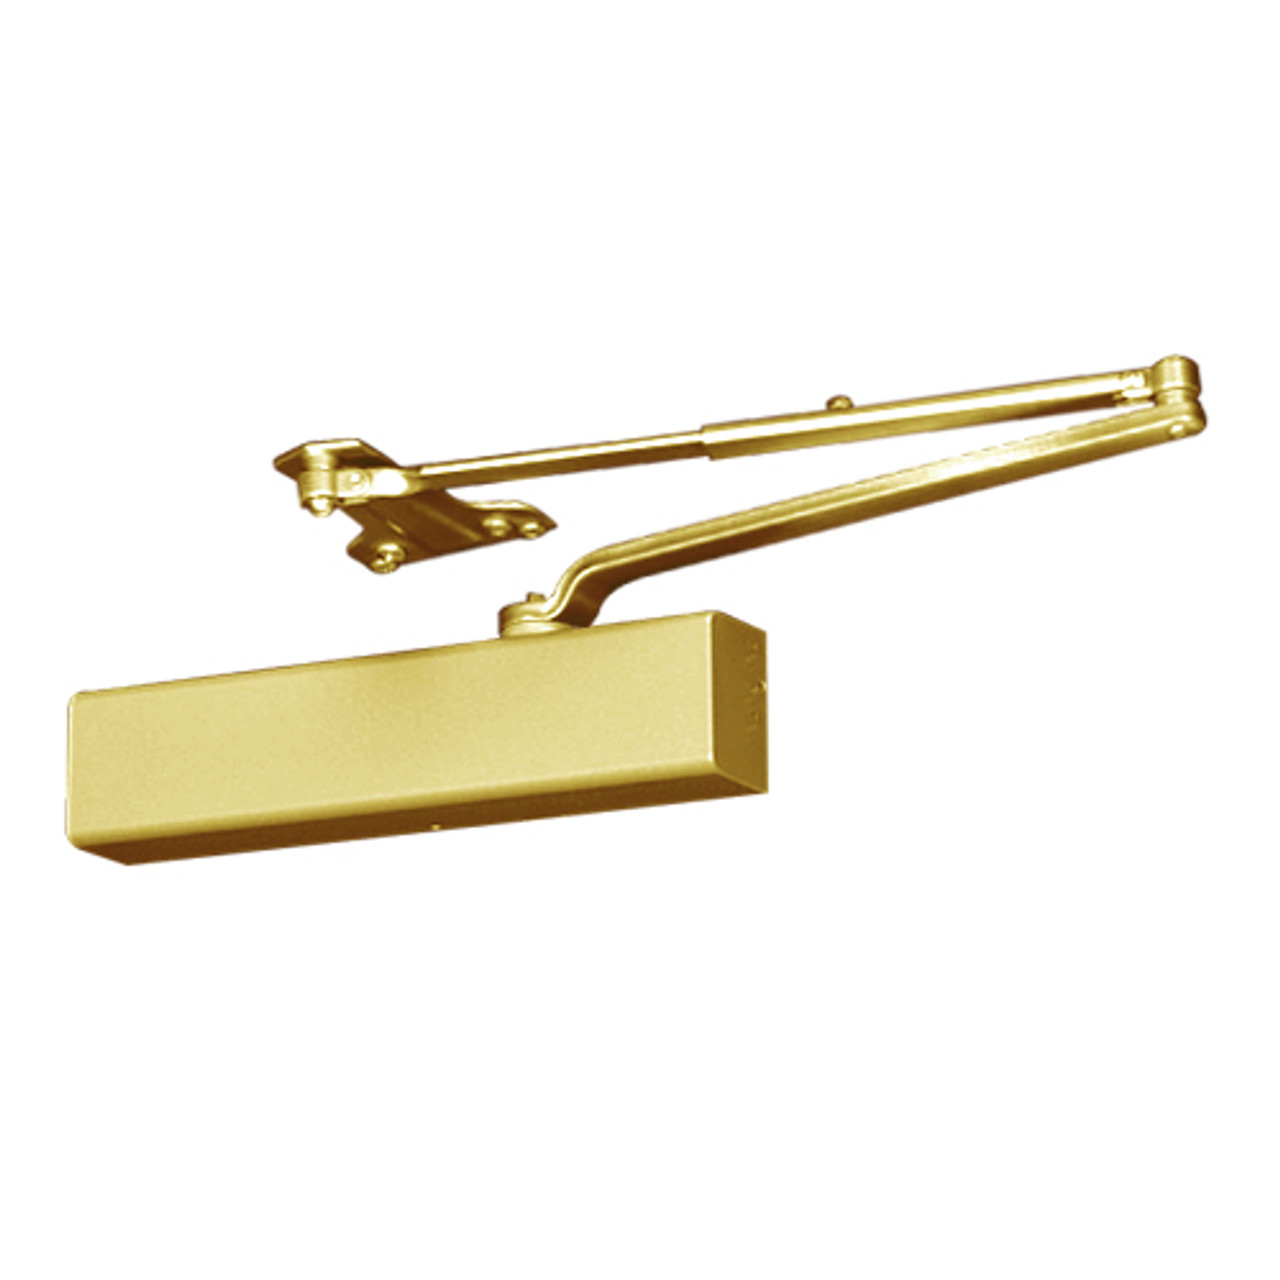 P8501-696 Norton 8000 Series Full Cover Non-Hold Open Door Closers with Parallel Arm Application in Gold Finish